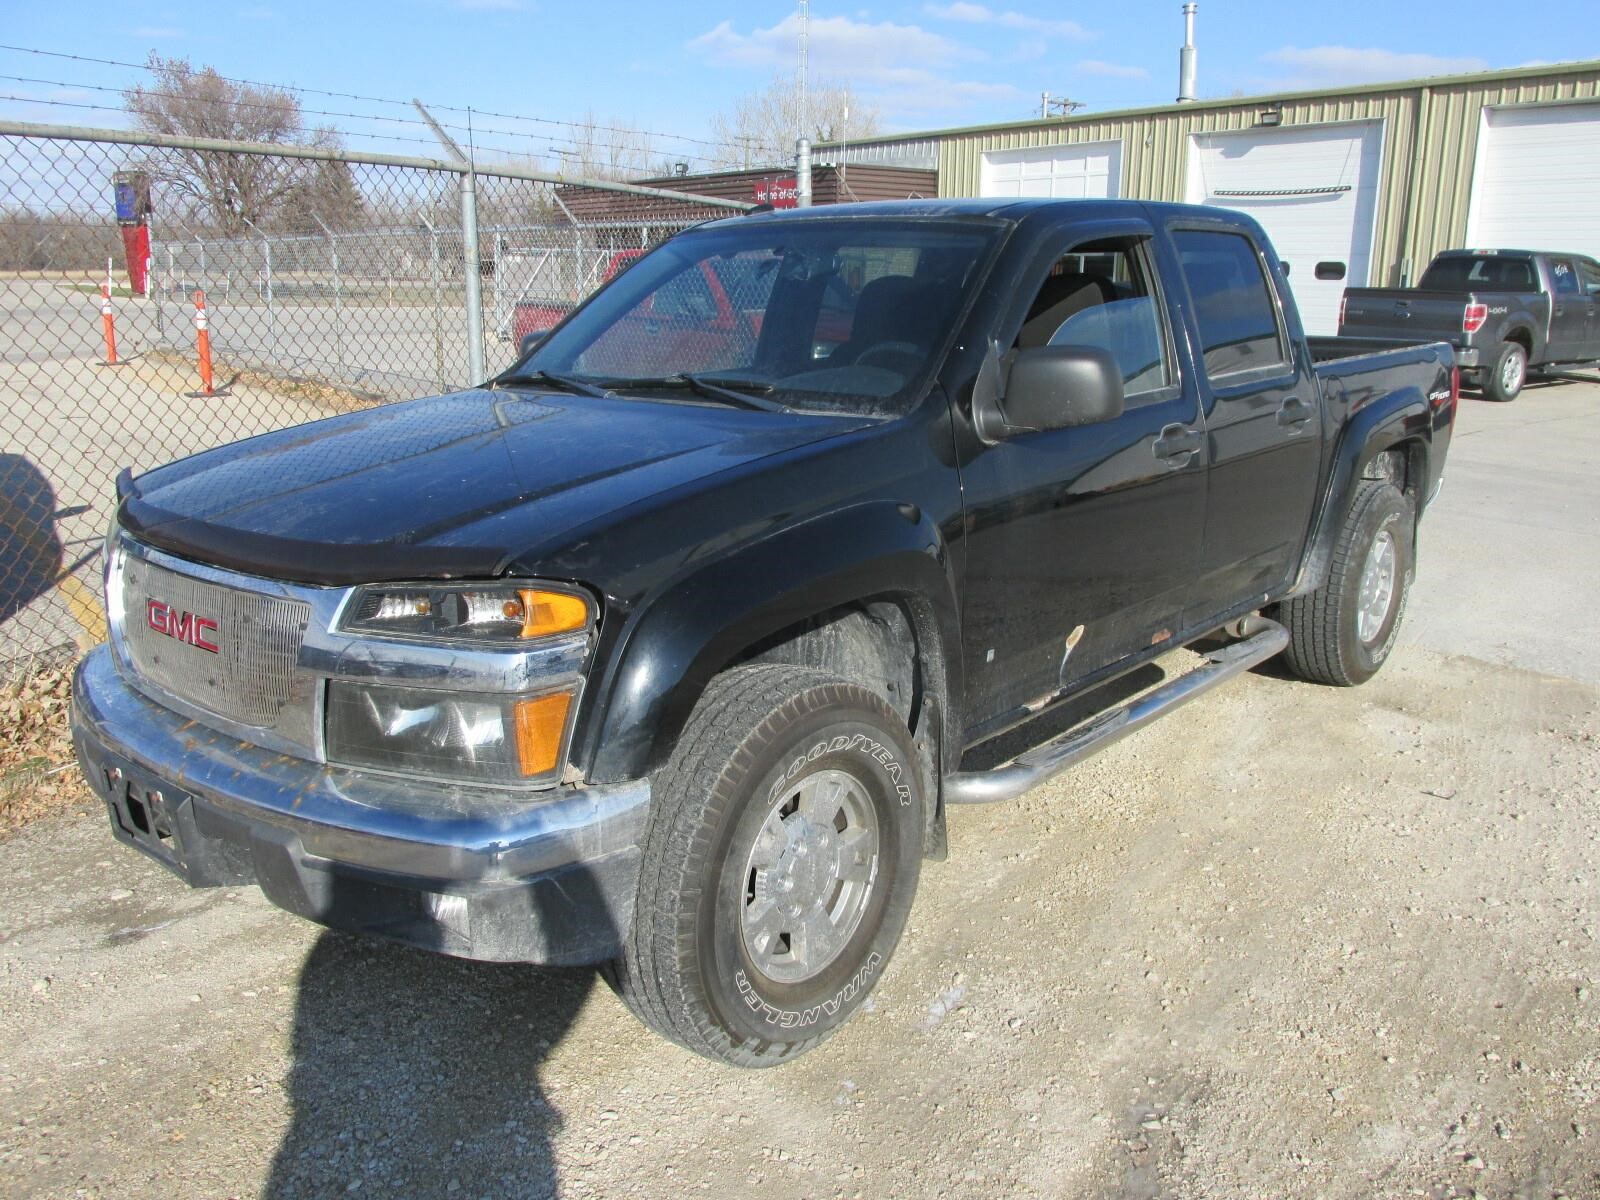 Online Auto Auction November 9 2020 Featuring VEMA Vehicles